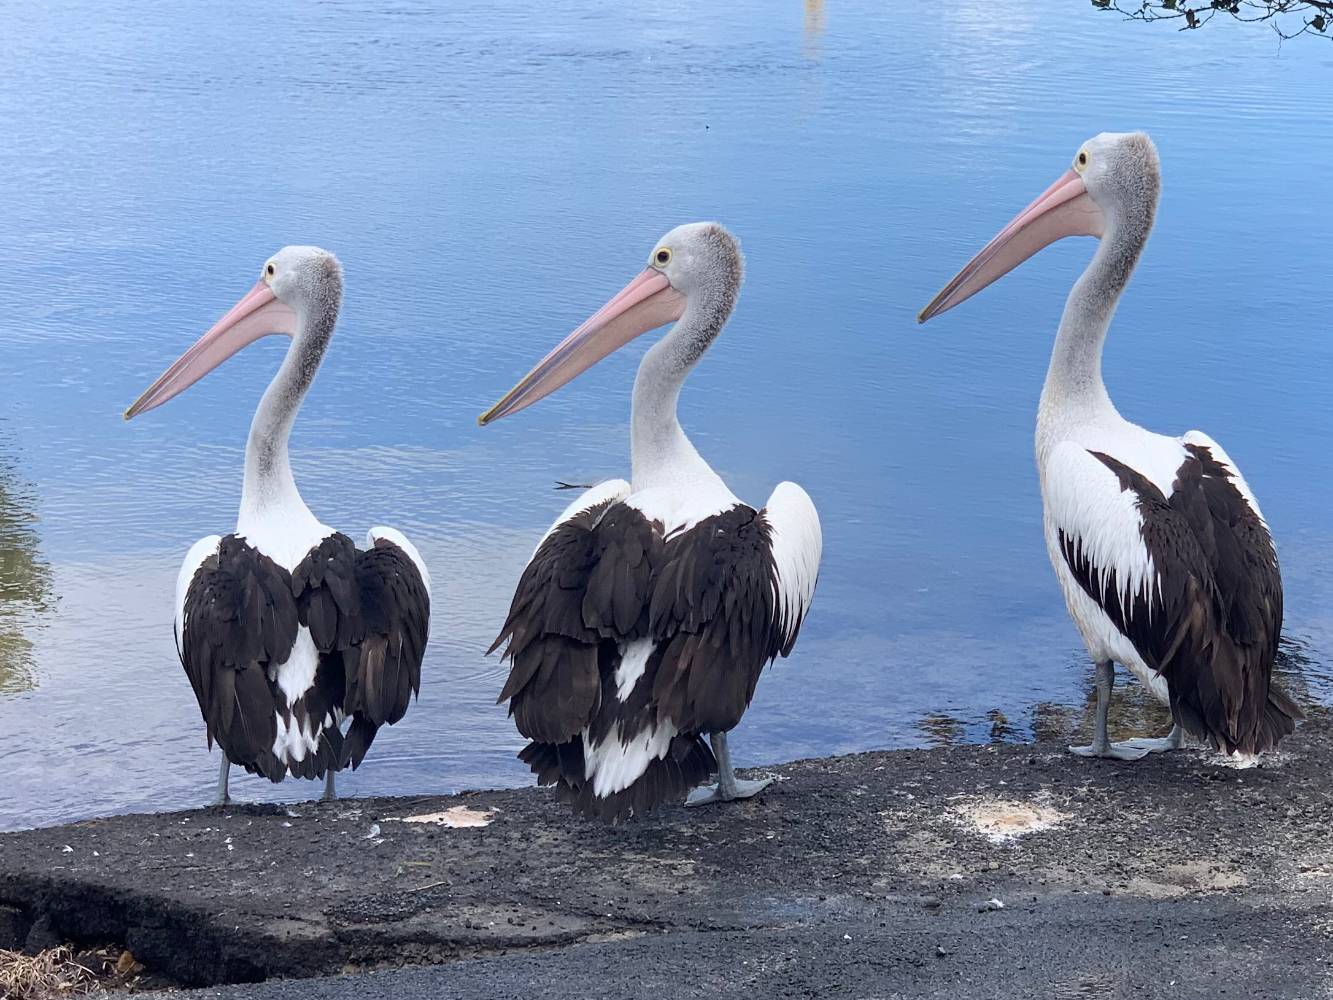 Pelicans fishing at waterfront